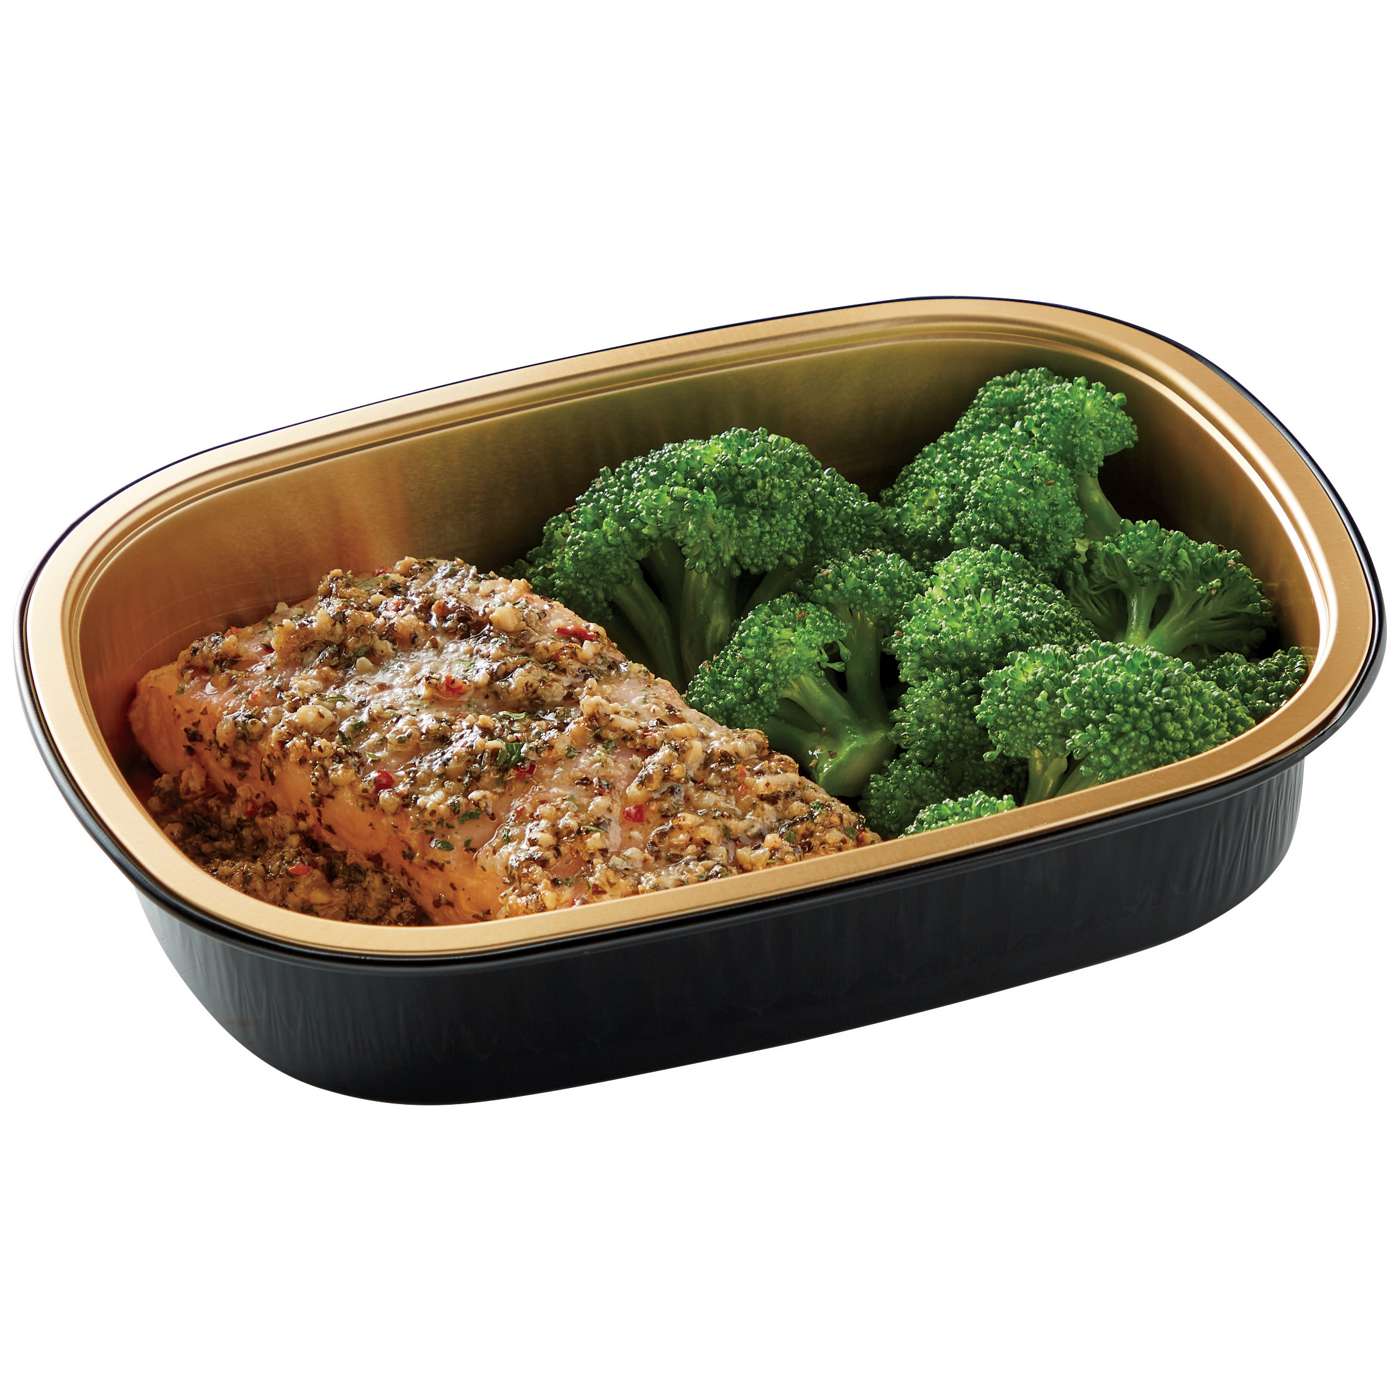 Meal Simple by H-E-B Low Carb Lifestyle Atlantic Salmon & Broccoli; image 4 of 4